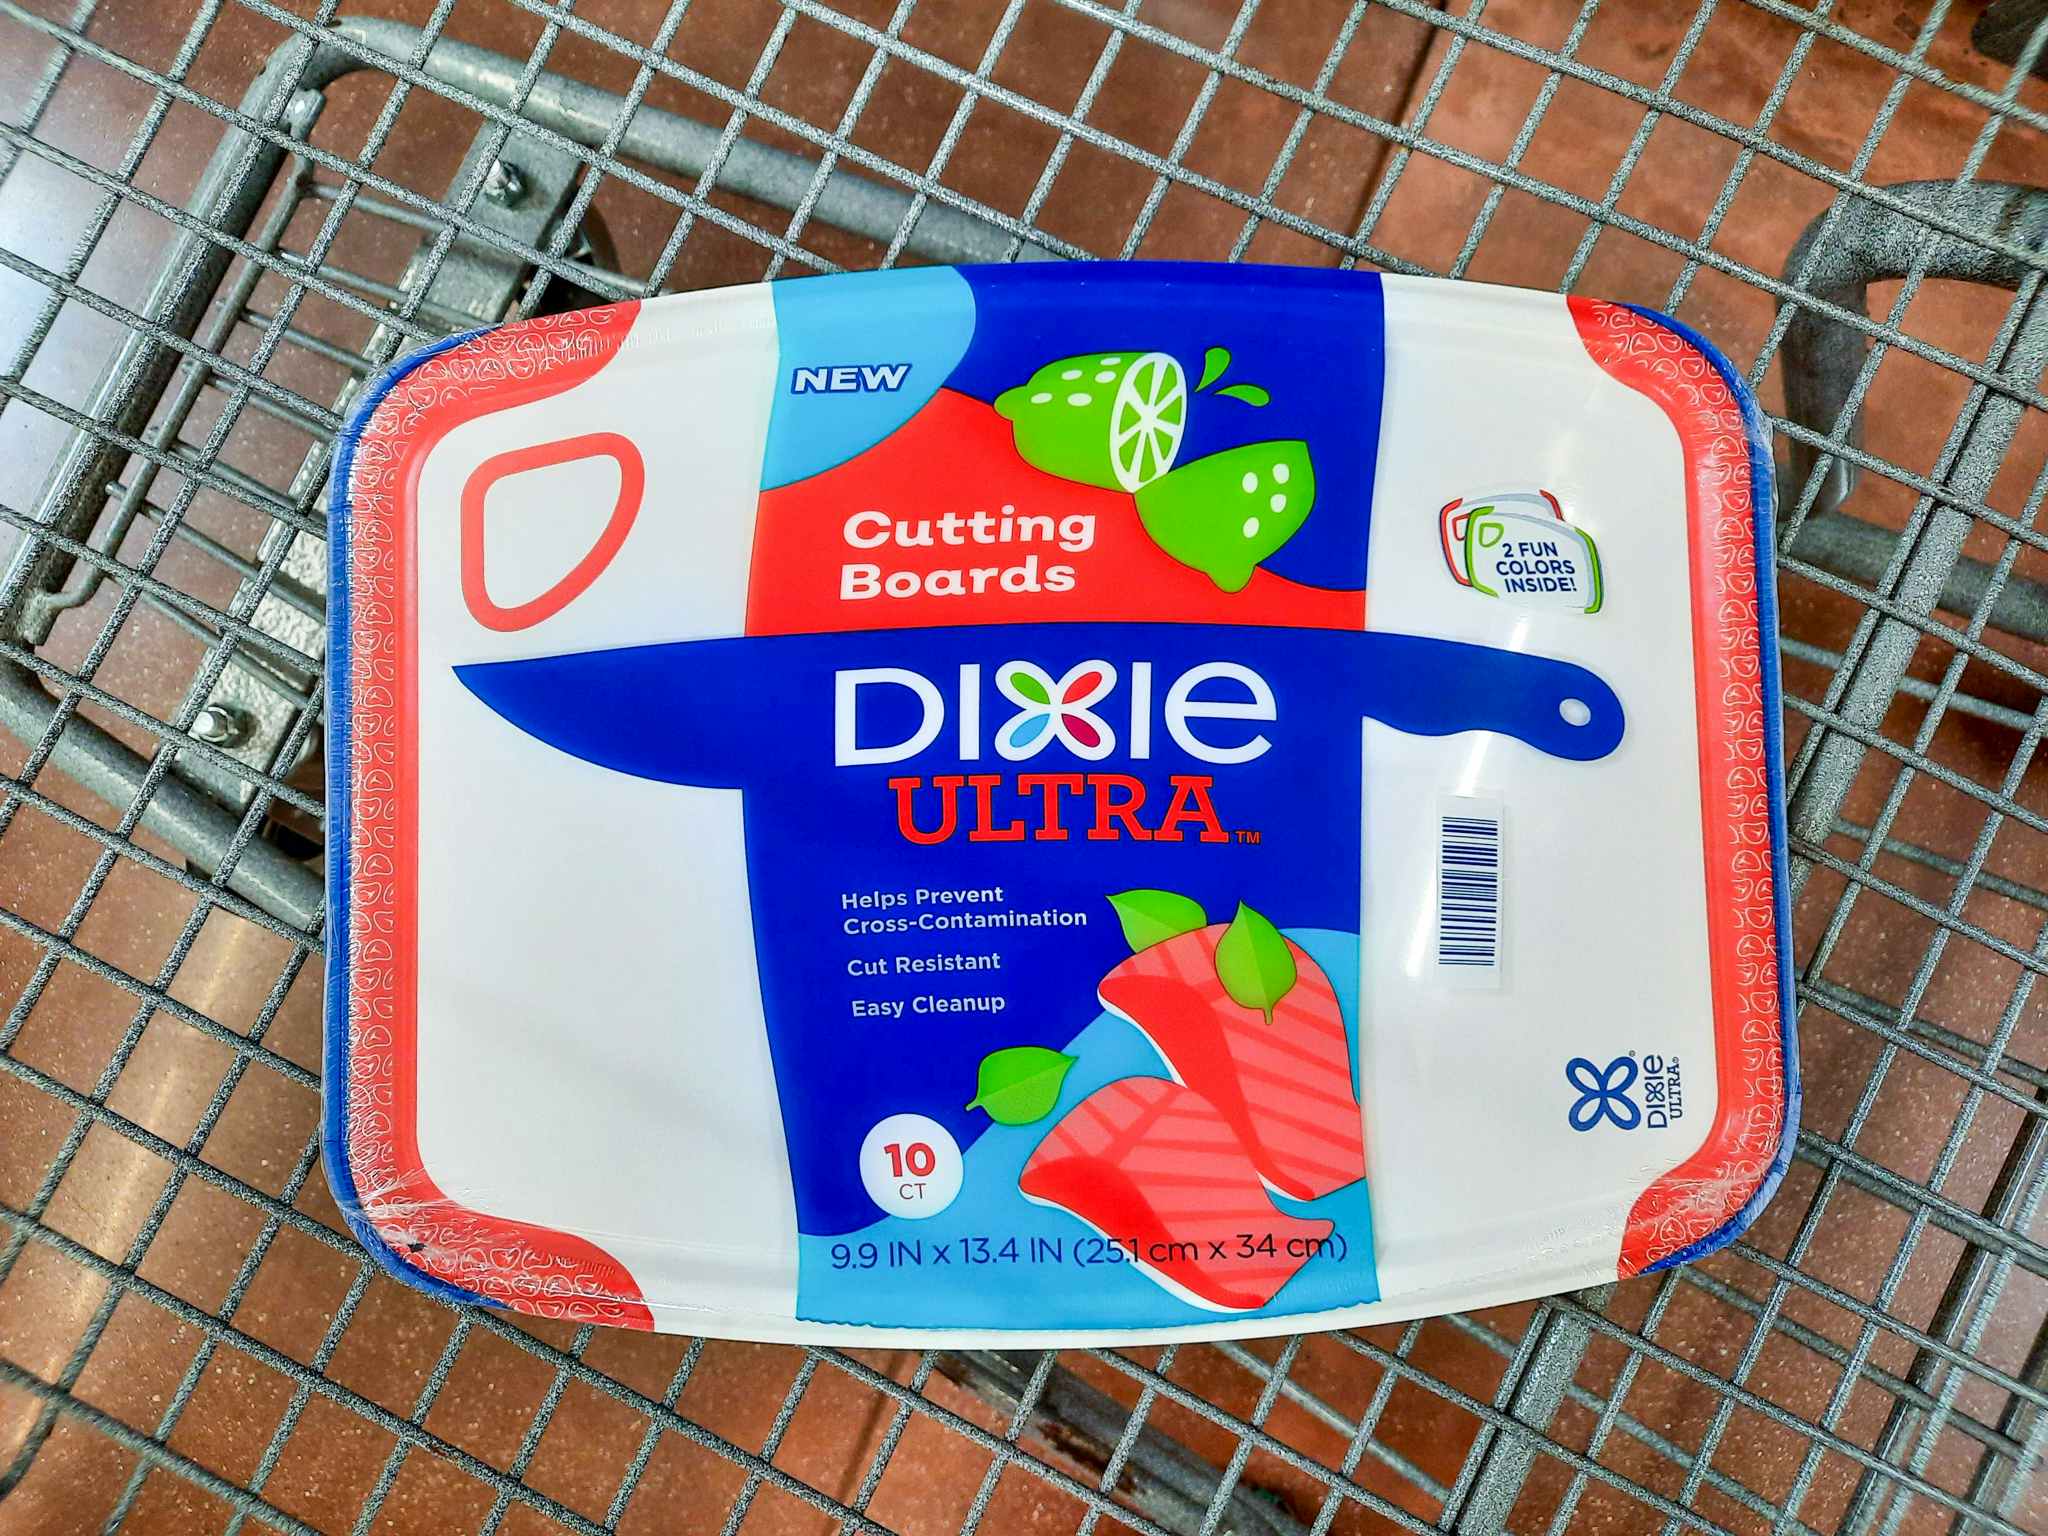 Dixie Ultra Disposable Cutting Boards in Walmart shopping cart